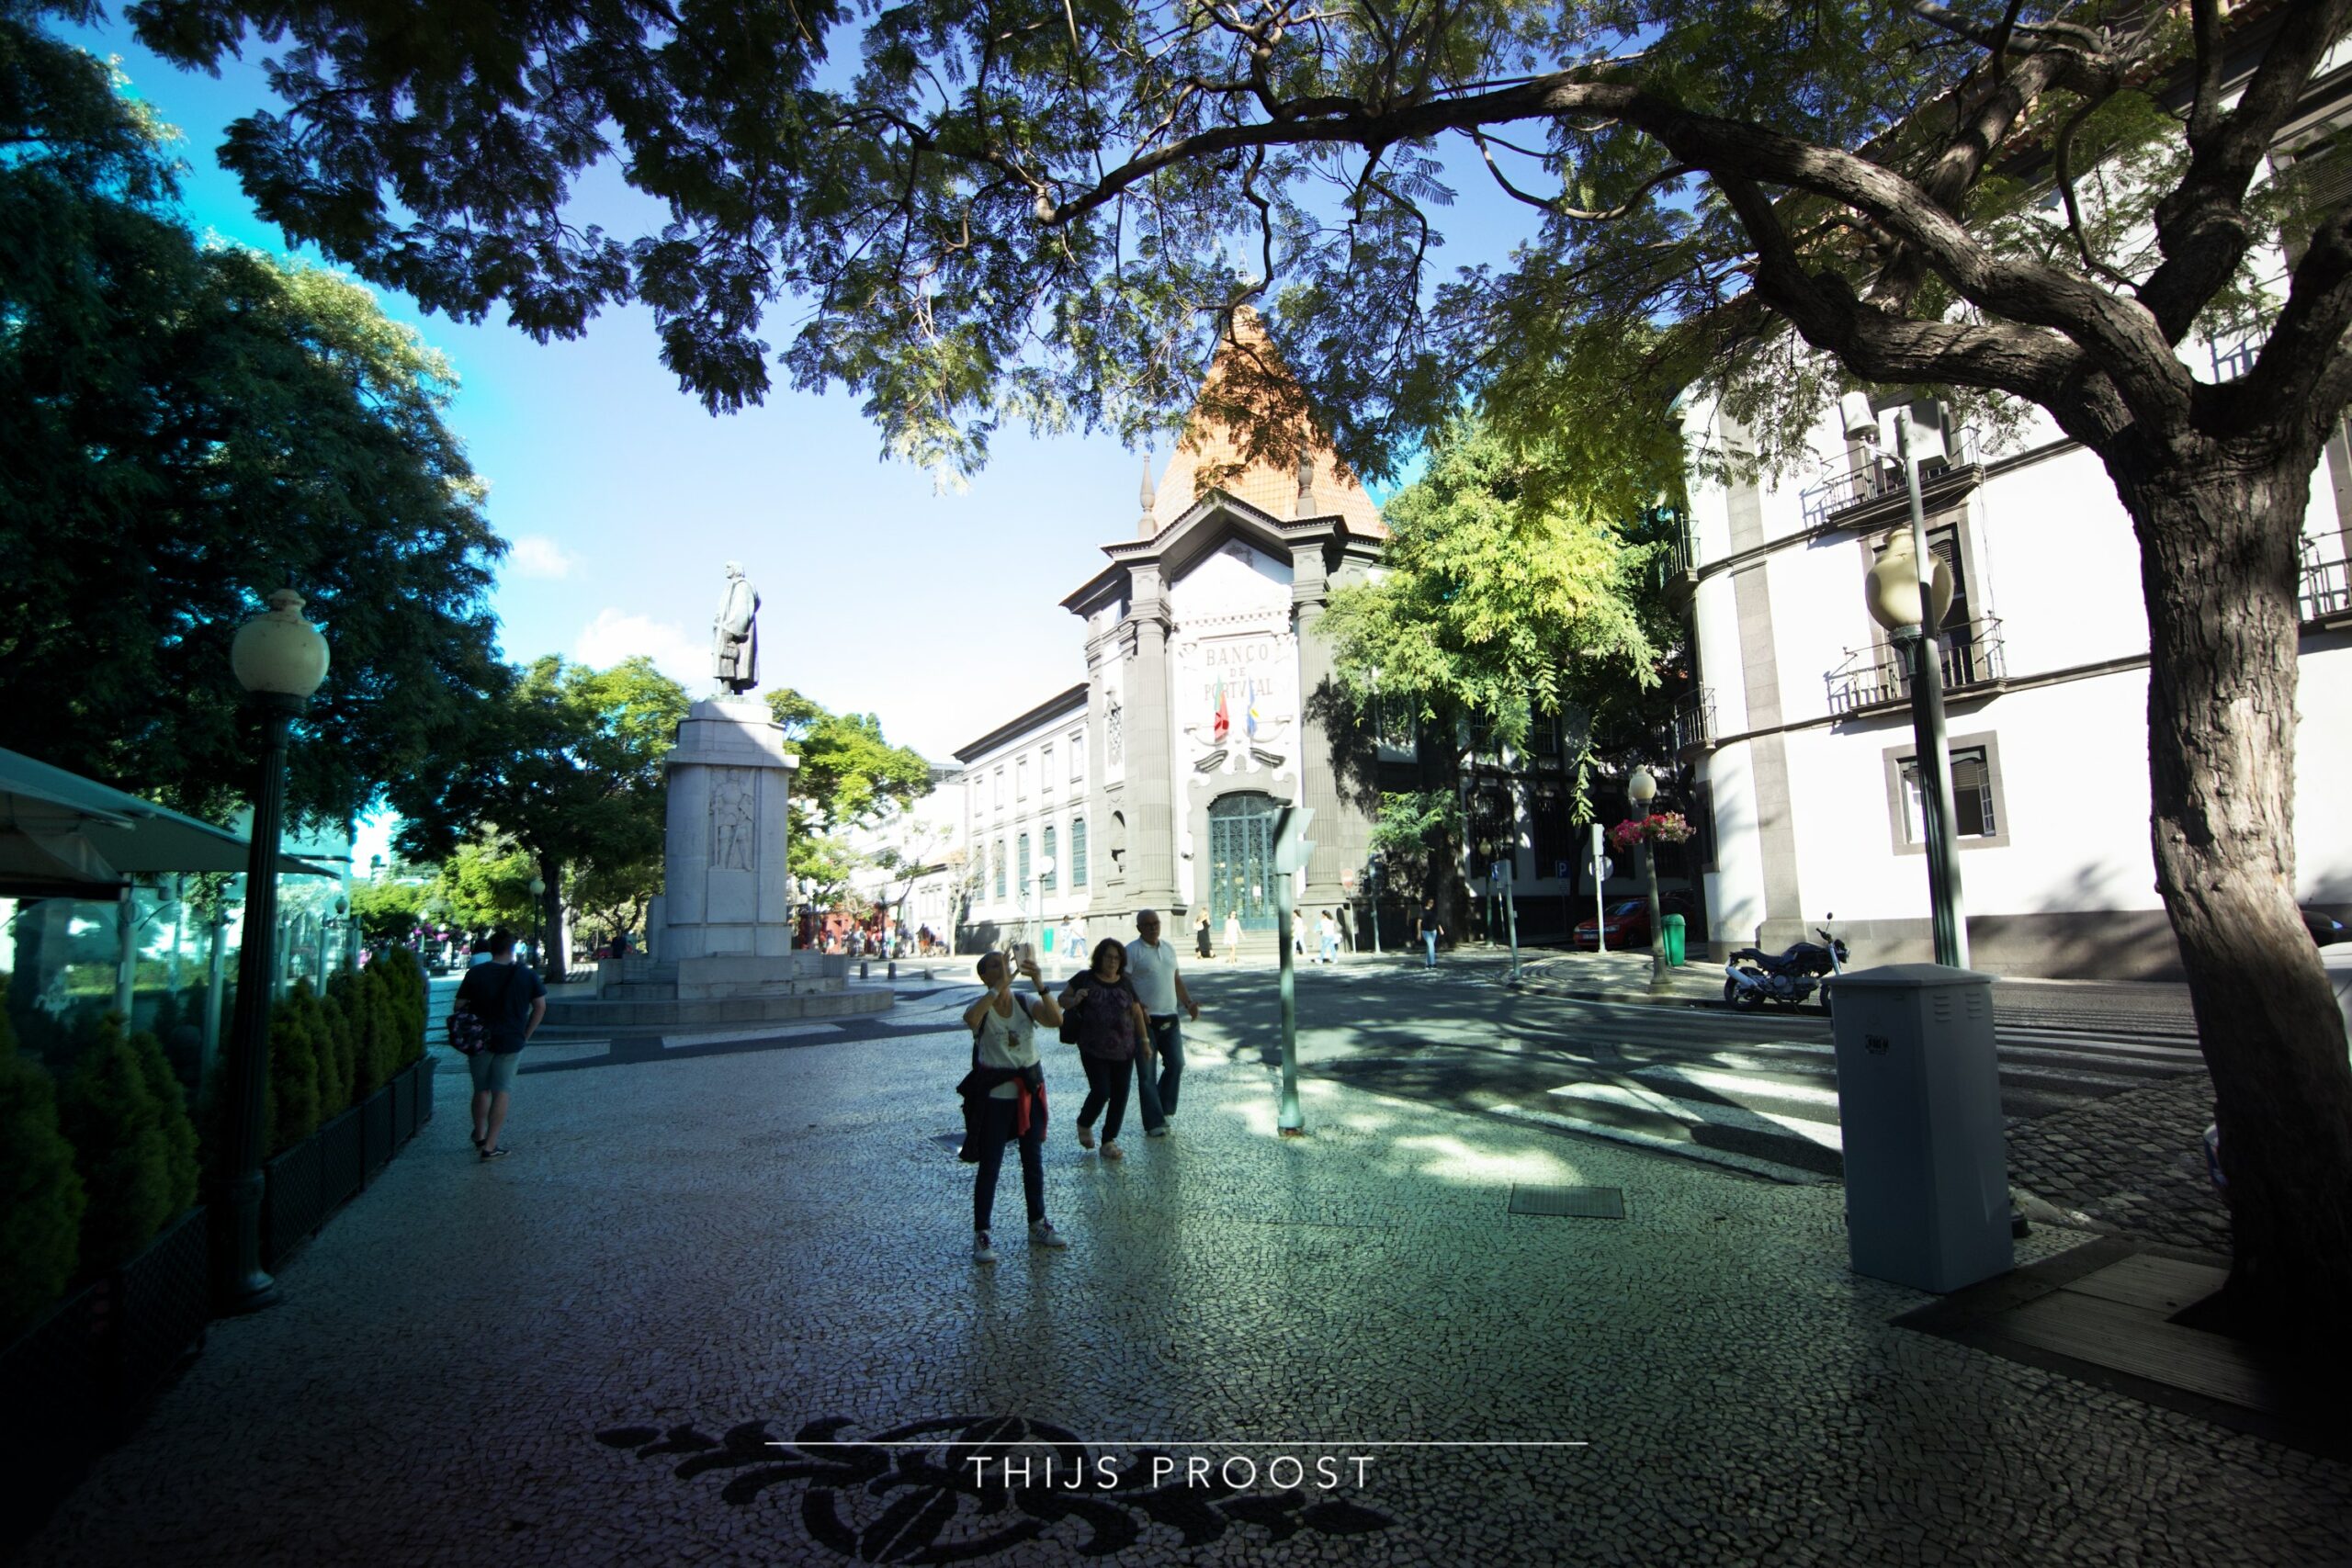 Market square in Funchal Madeira. A tree covers the top of the picture trowing a shadow over the ground. In the distance is a bank in an old Portugese style building. A statue stand at the center of the square.